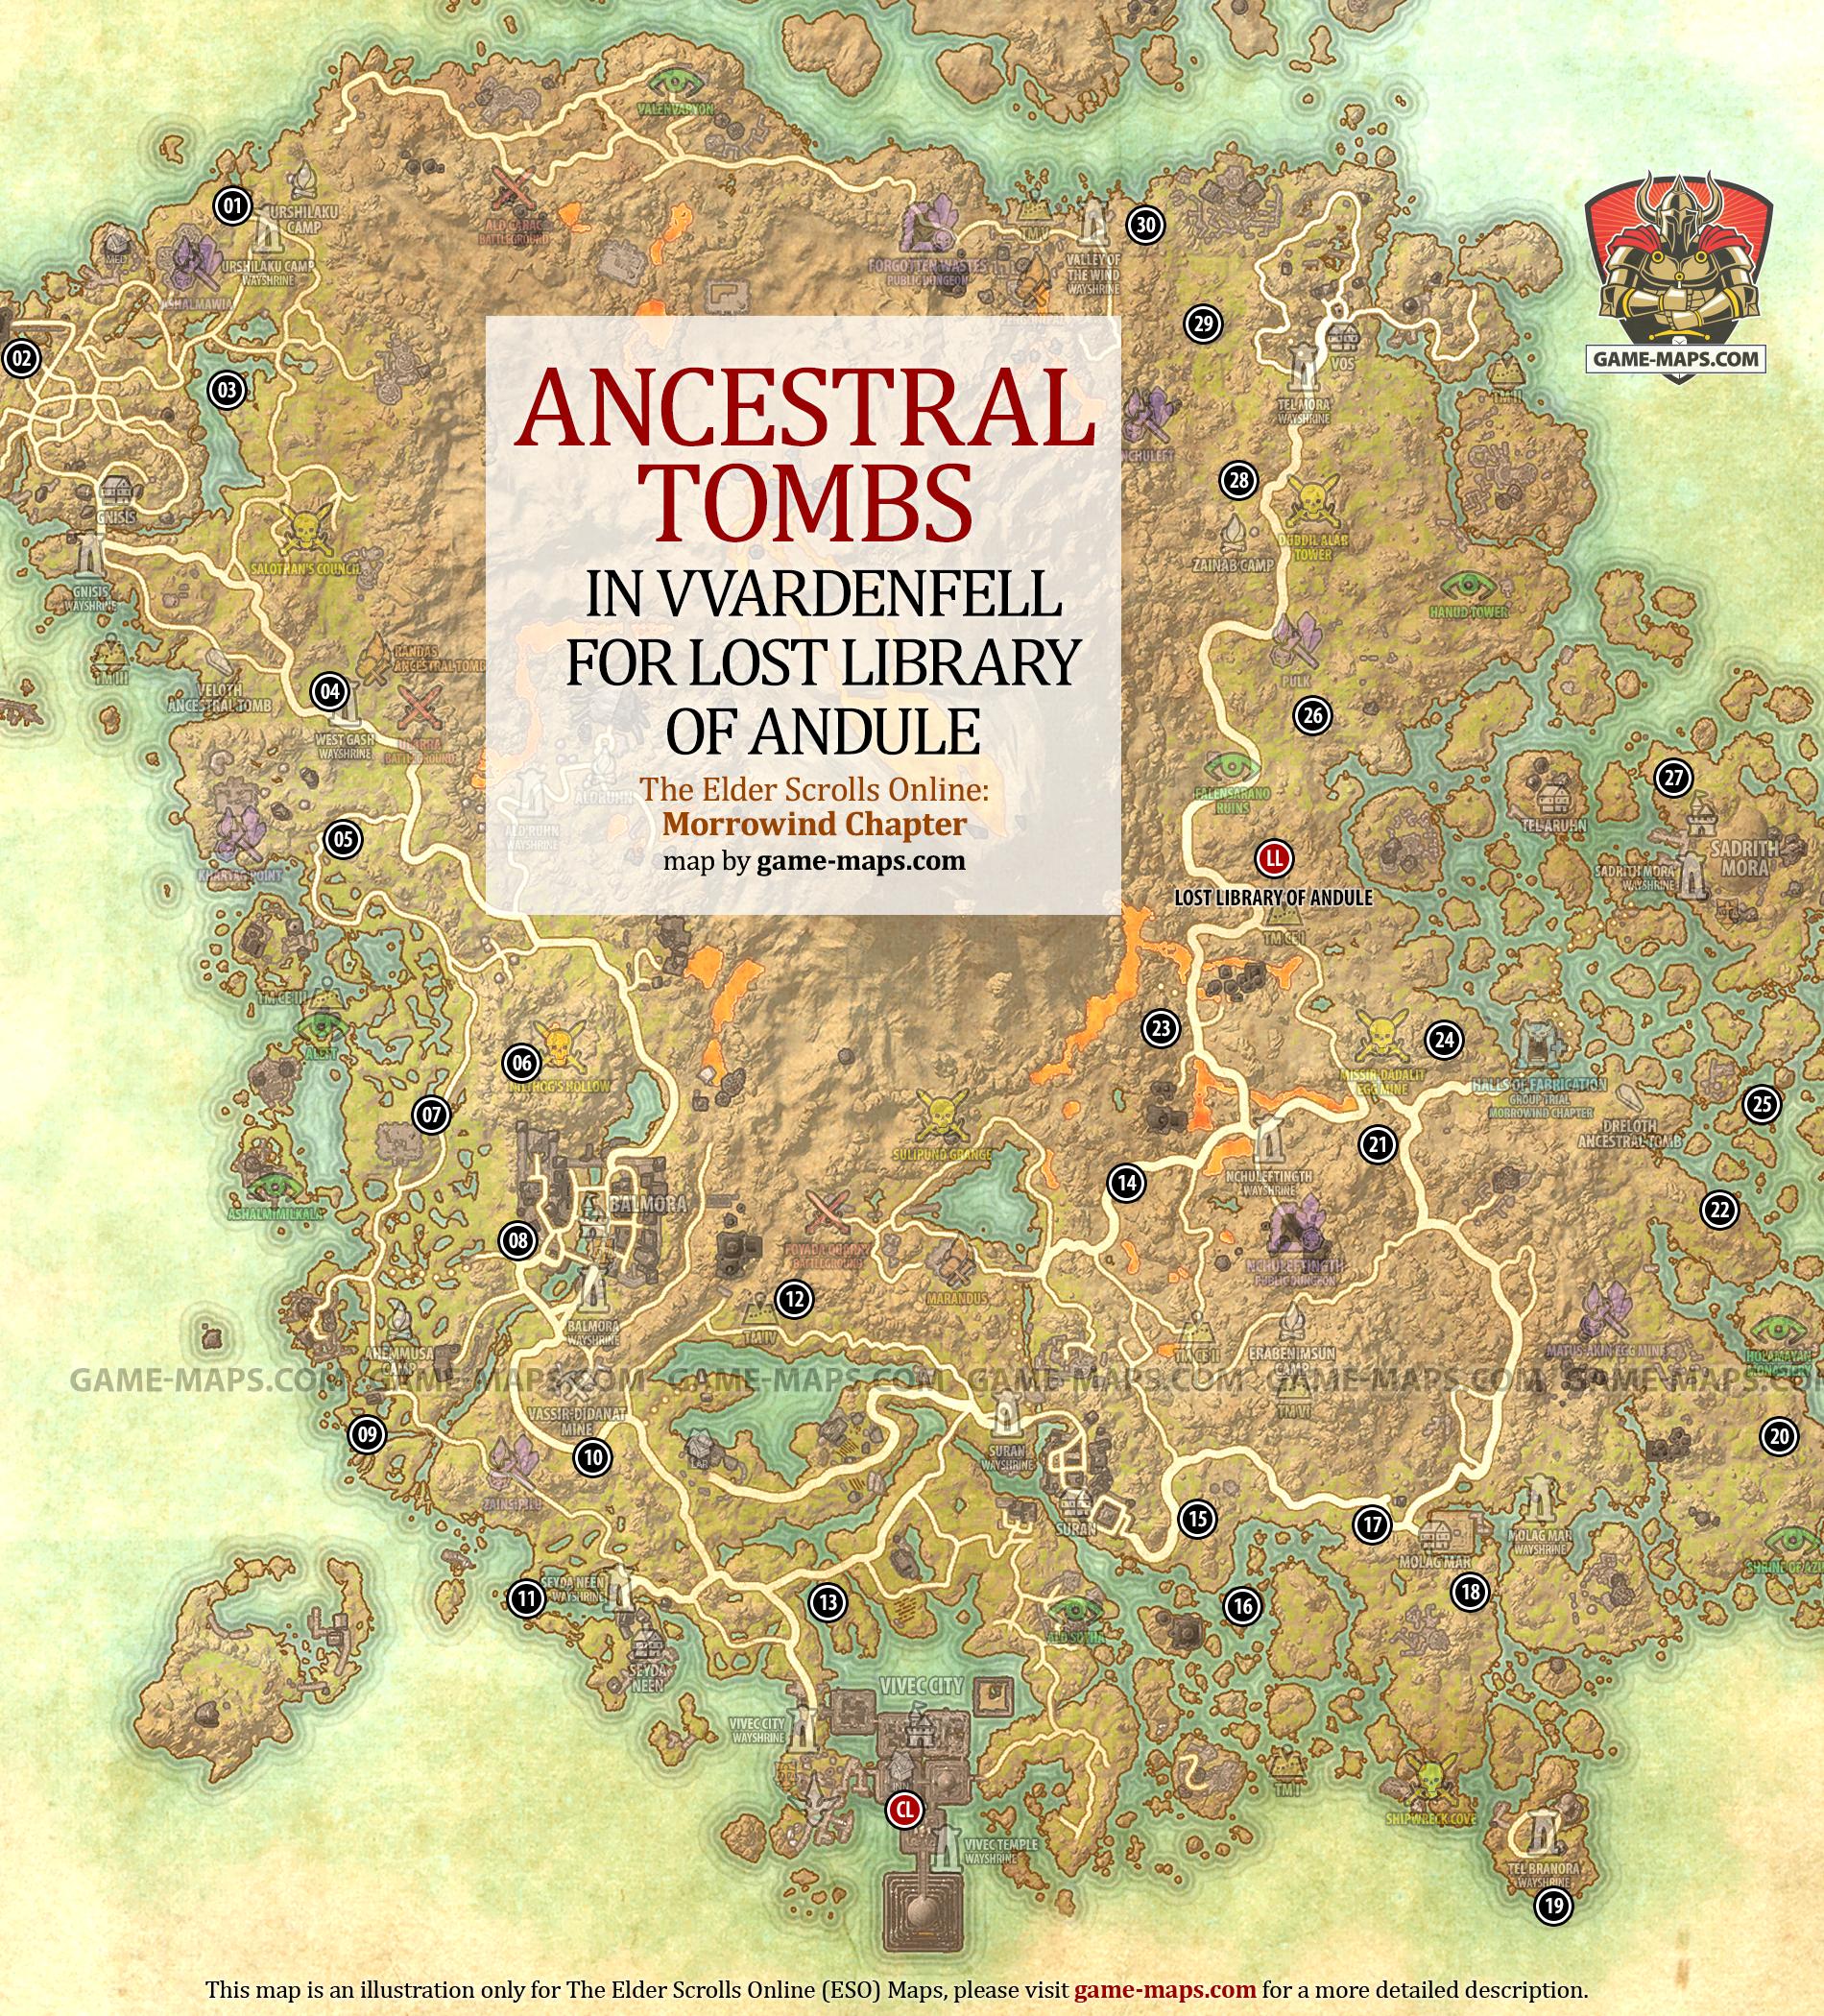 Ancestral Tombs Location Map for Lost Library of Andule - The Elder Scrolls Online: Morrowind